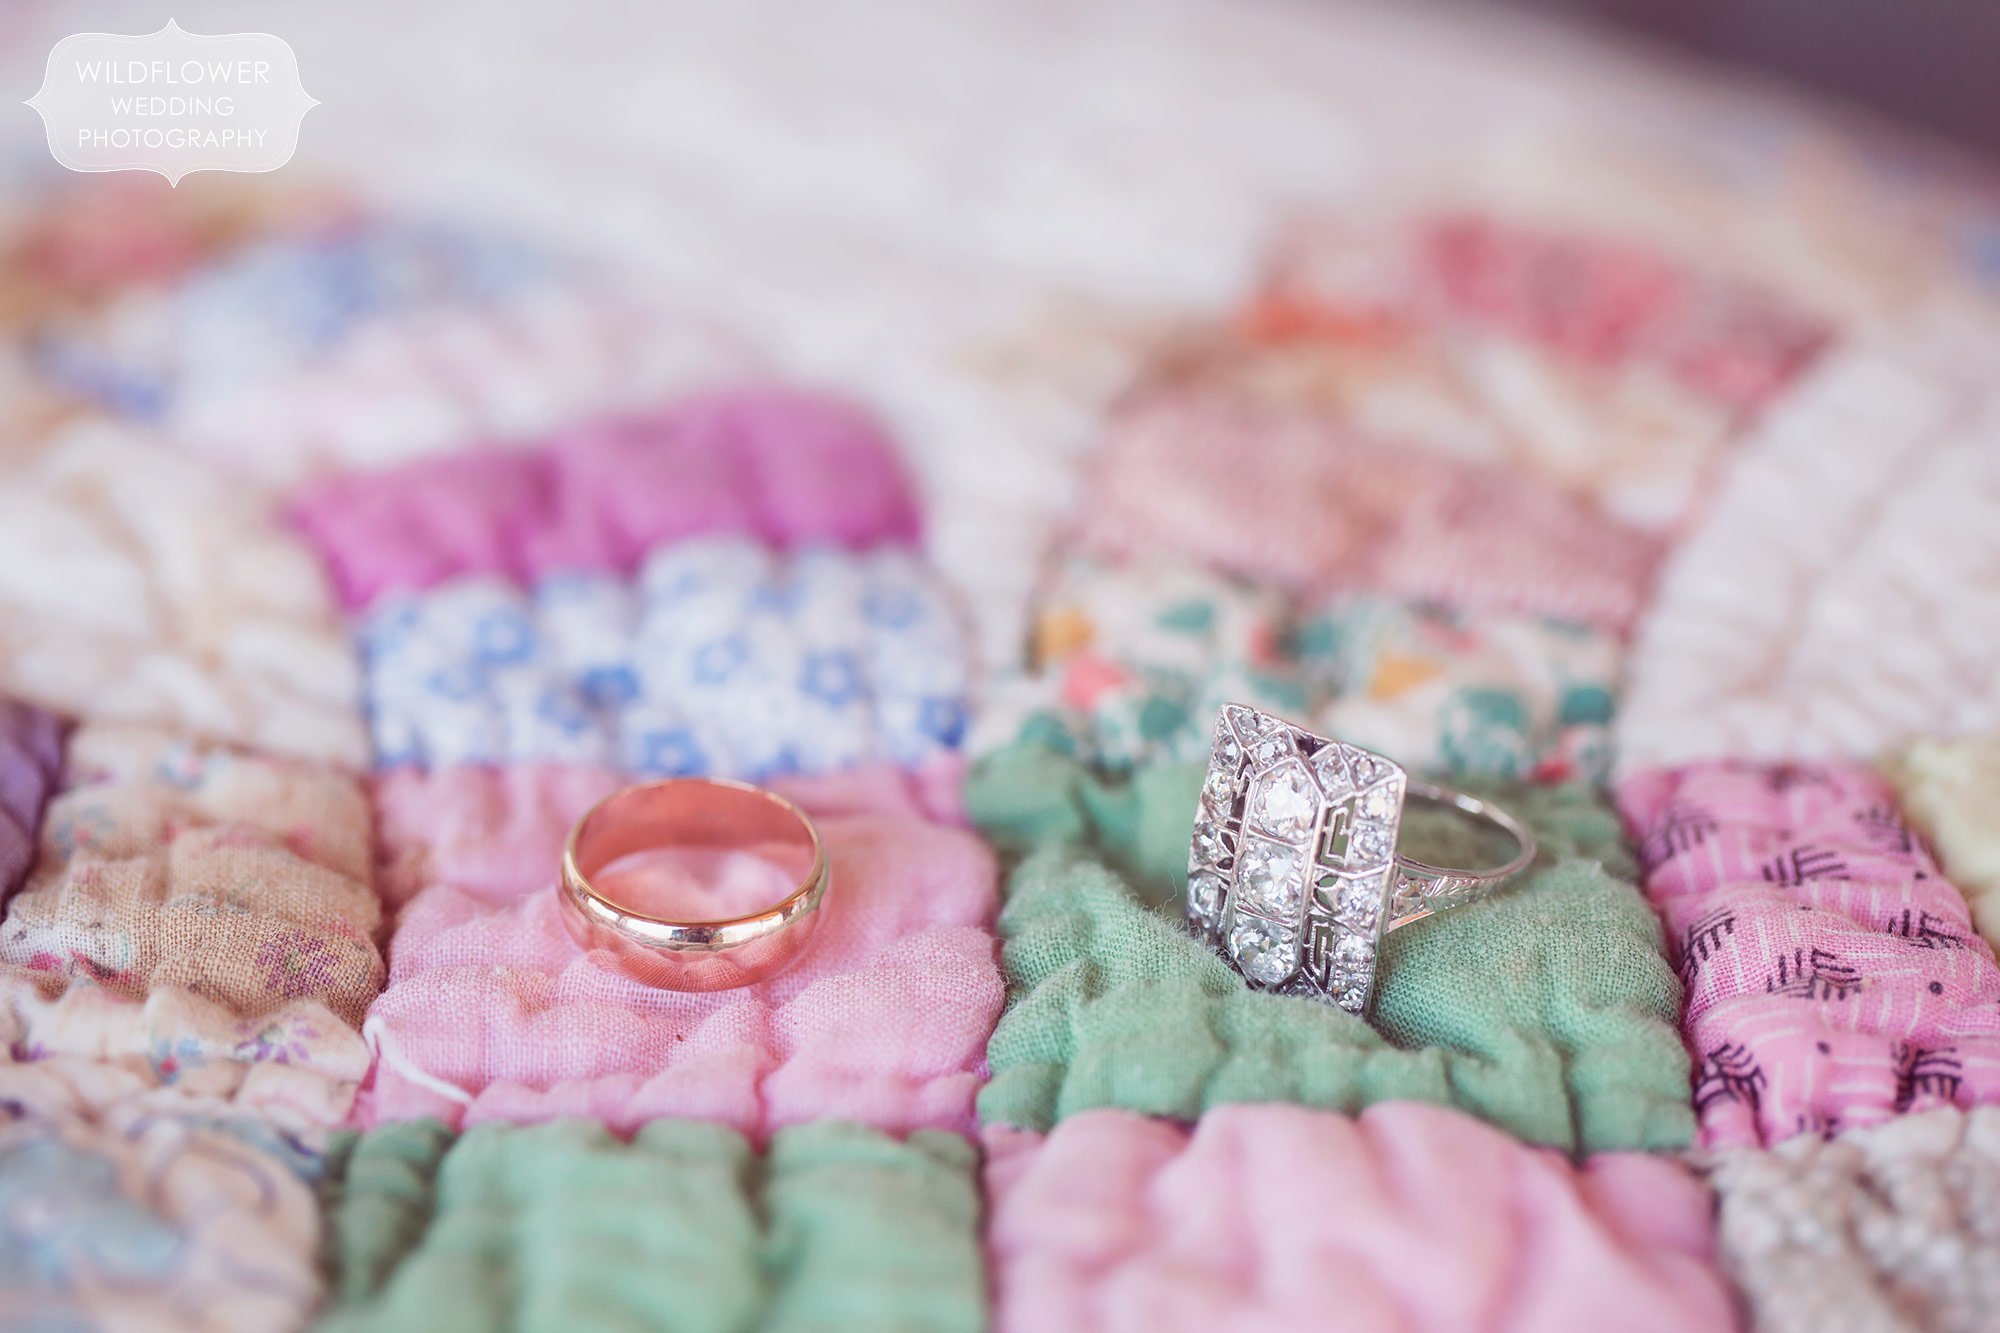 Wedding rings on a handmade colorful quilt for this winter wedding.